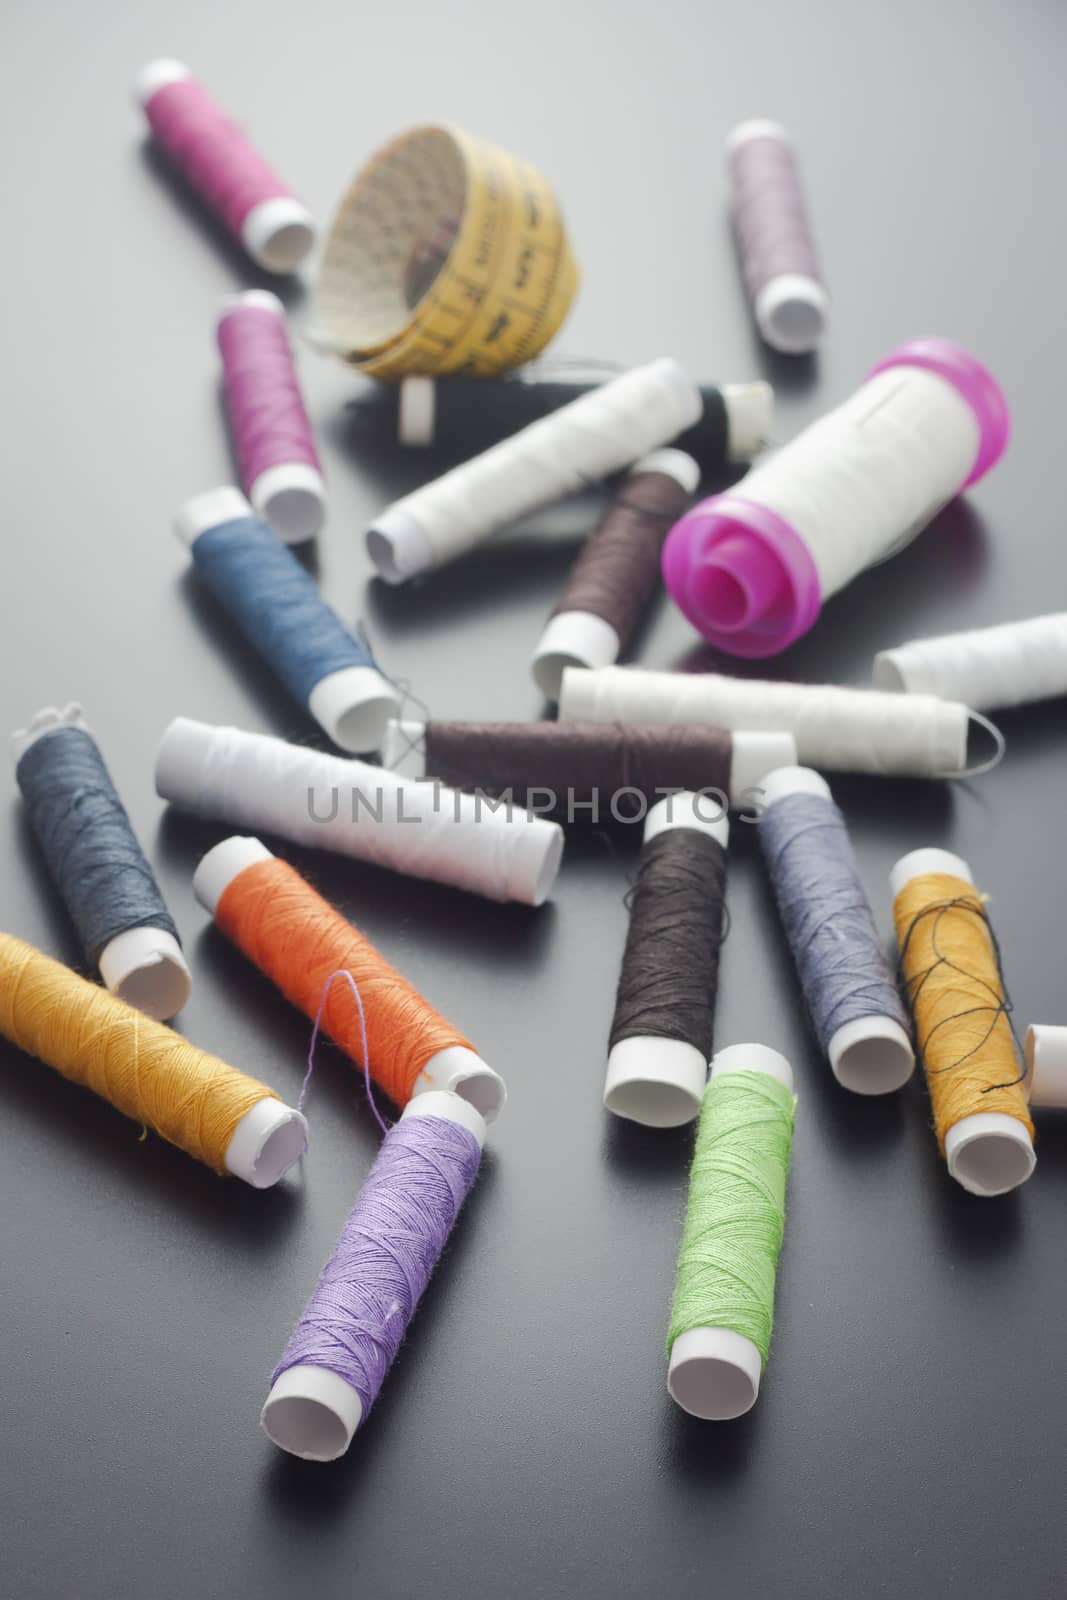 Spool of thread and pins. Sewing accessories